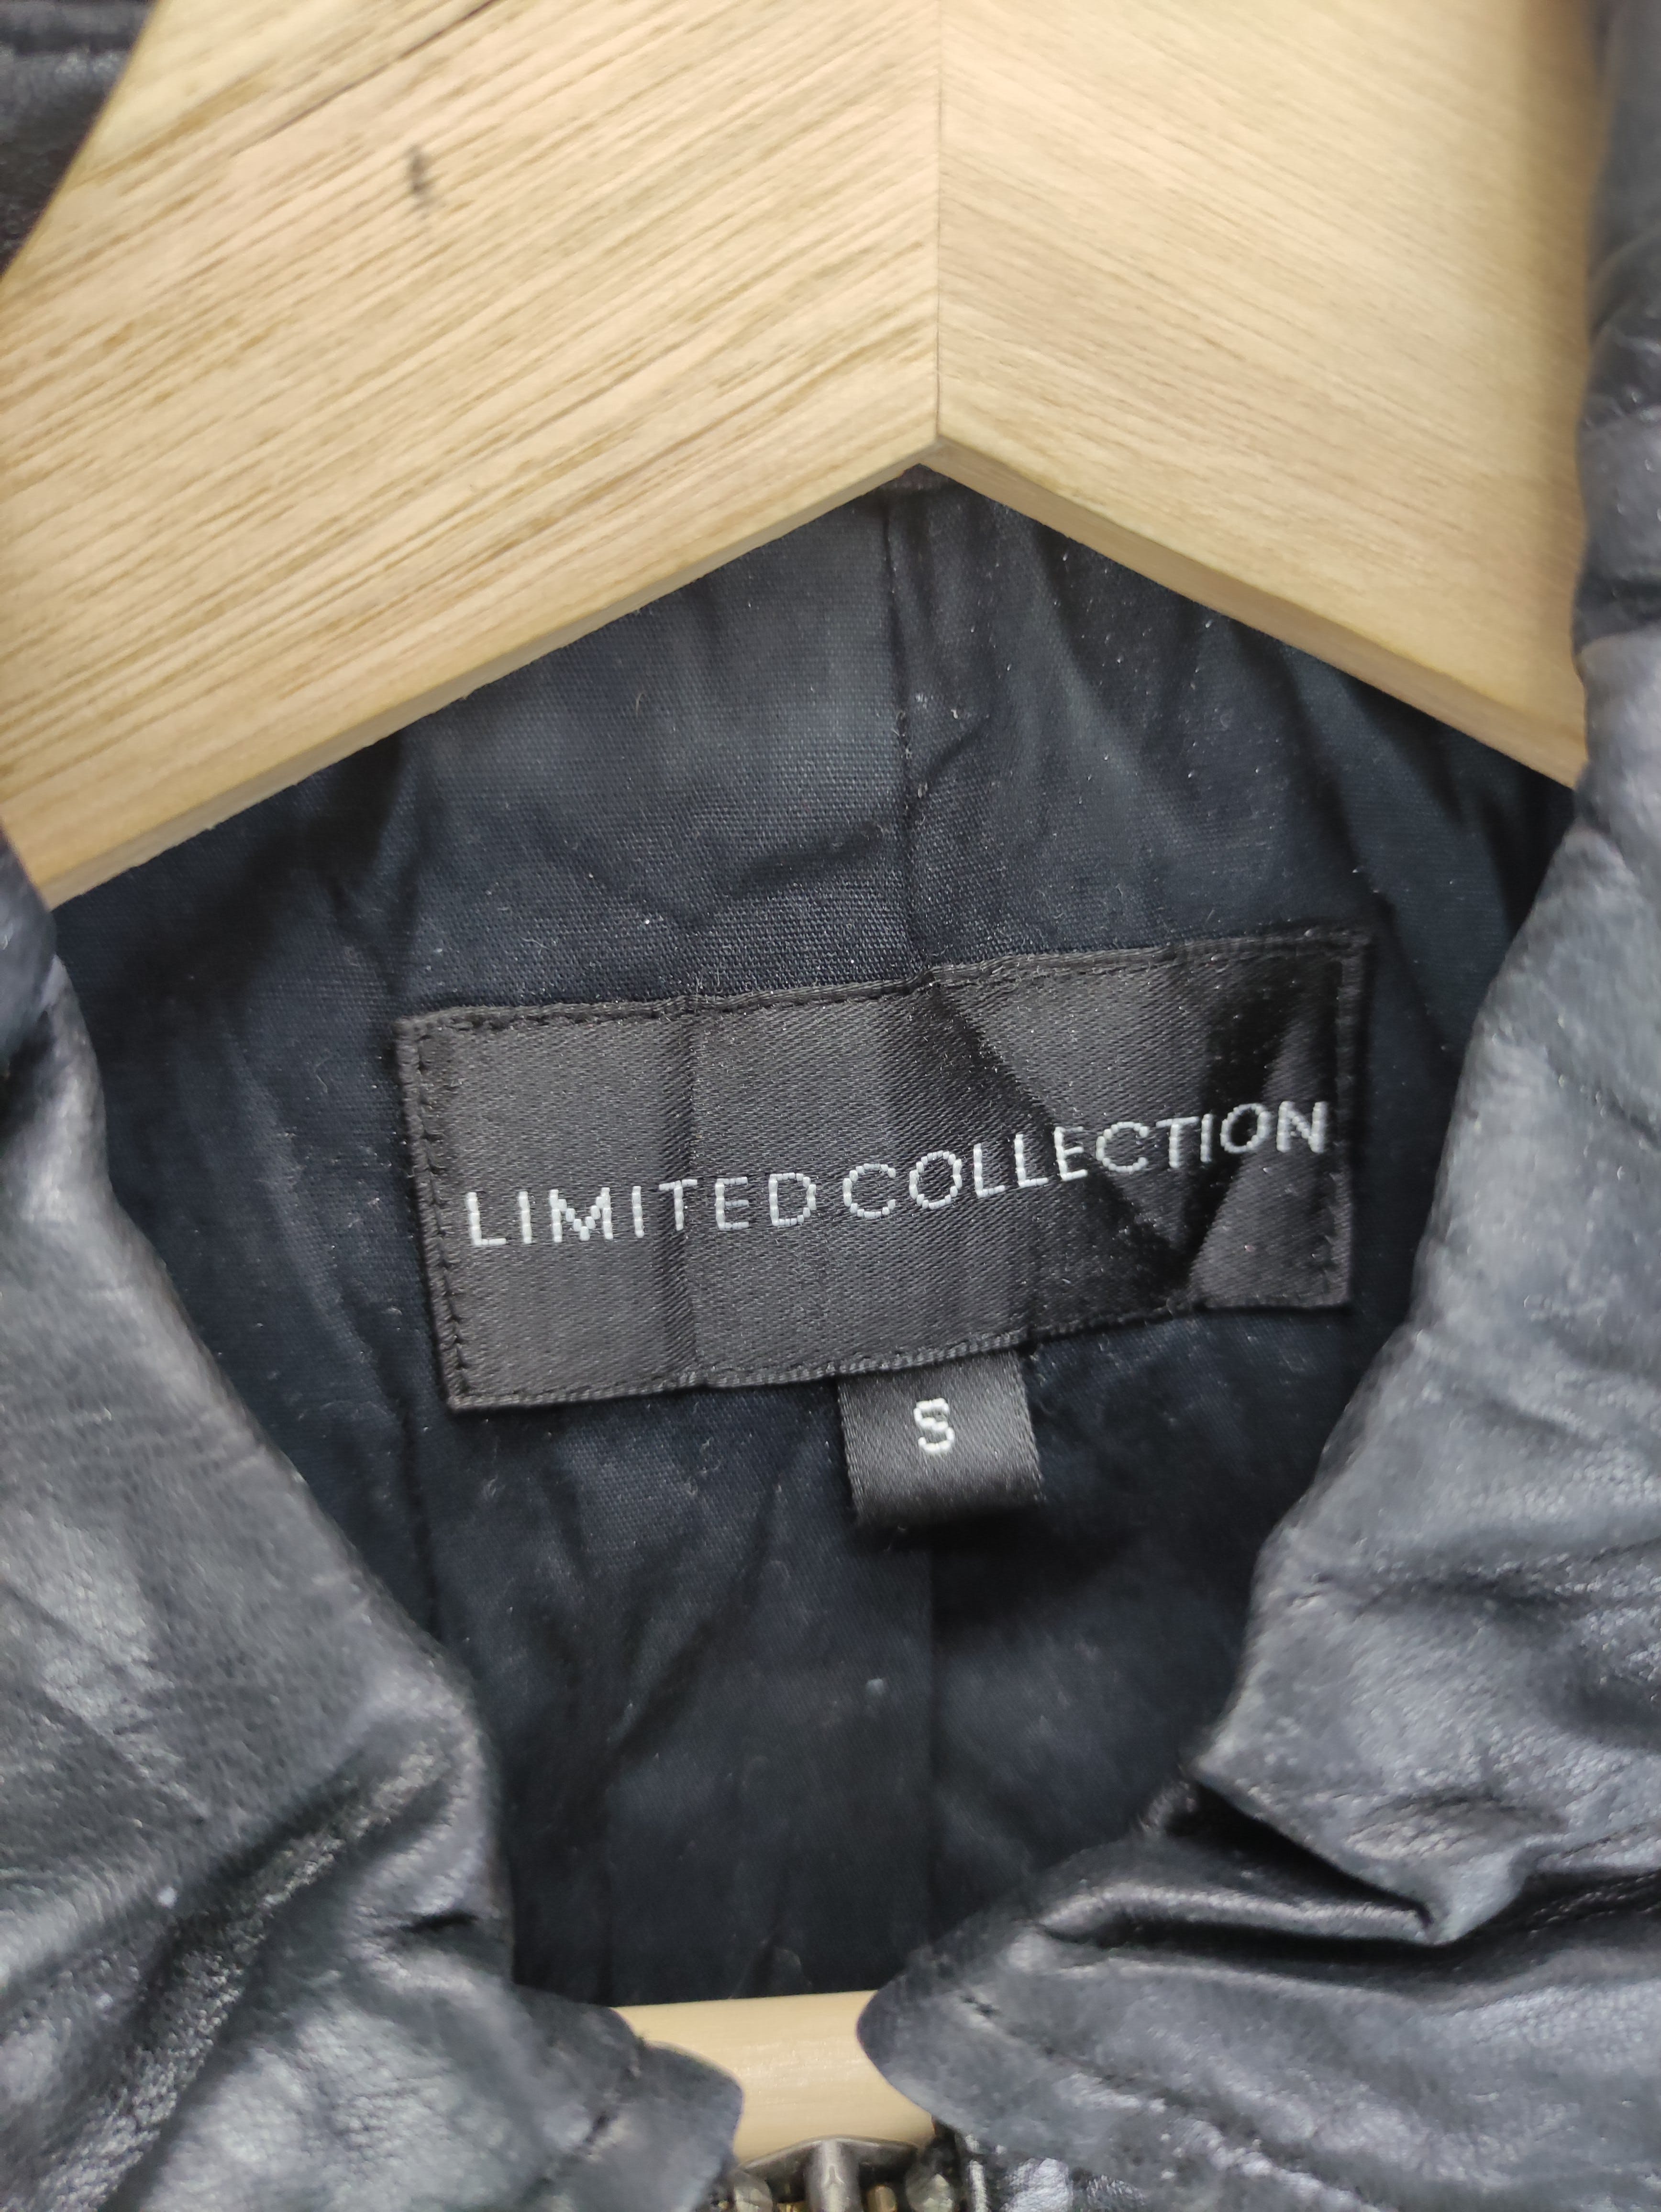 Vintage Leather Jacket Limited Collection Zipper - 4